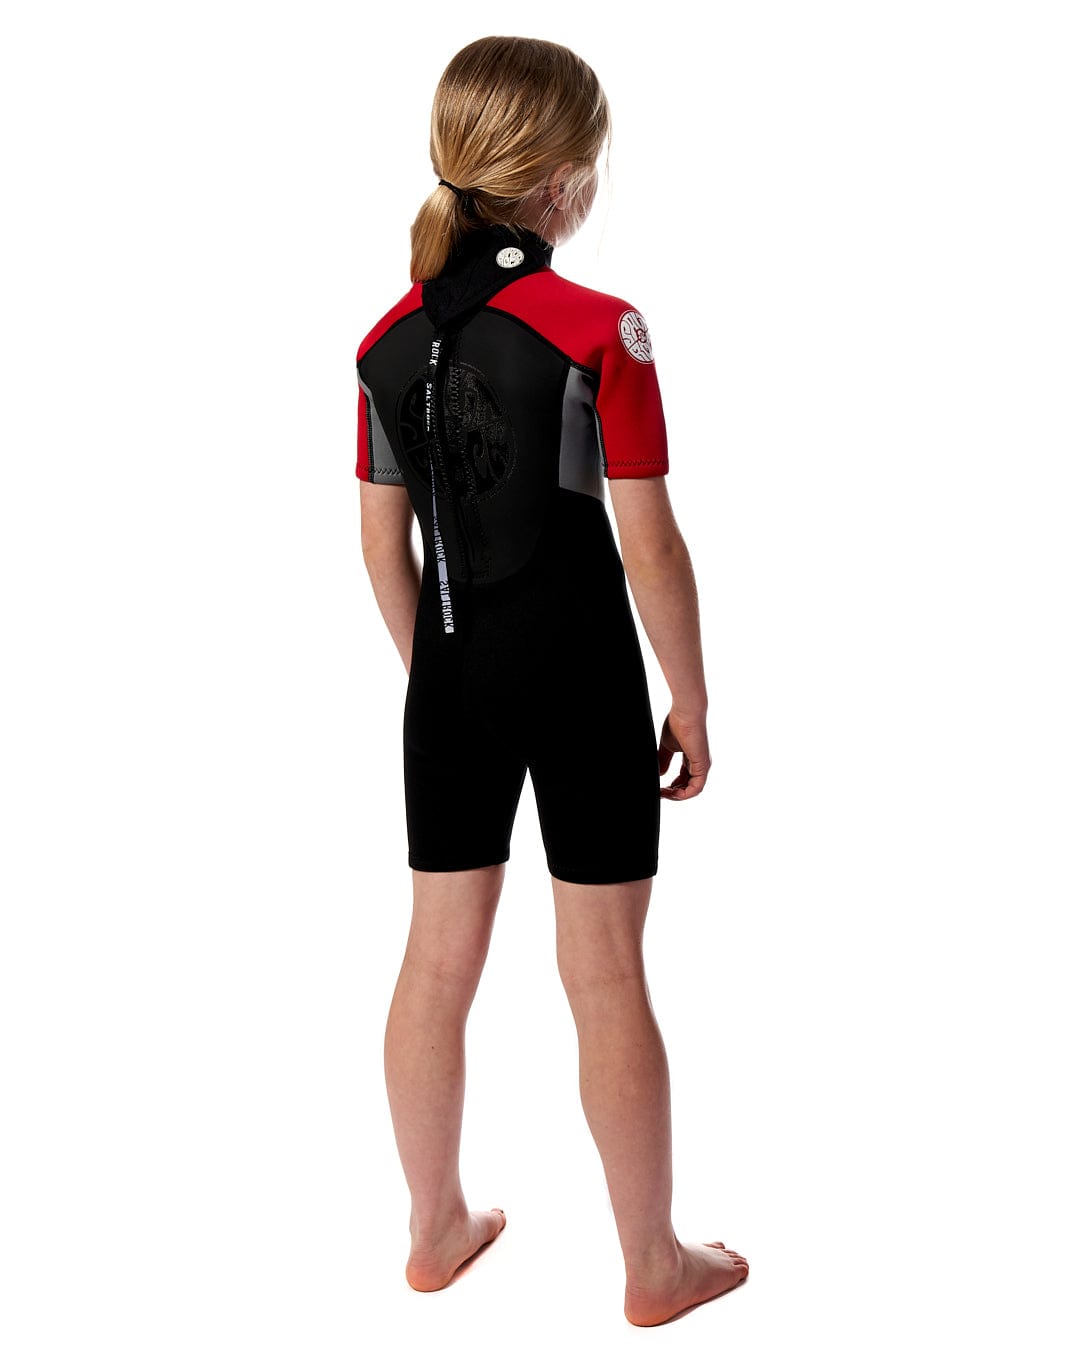 Young girl standing in profile wearing a Saltrock Core - Boys 3/2 Shortie Wetsuit in black and red against a white background.